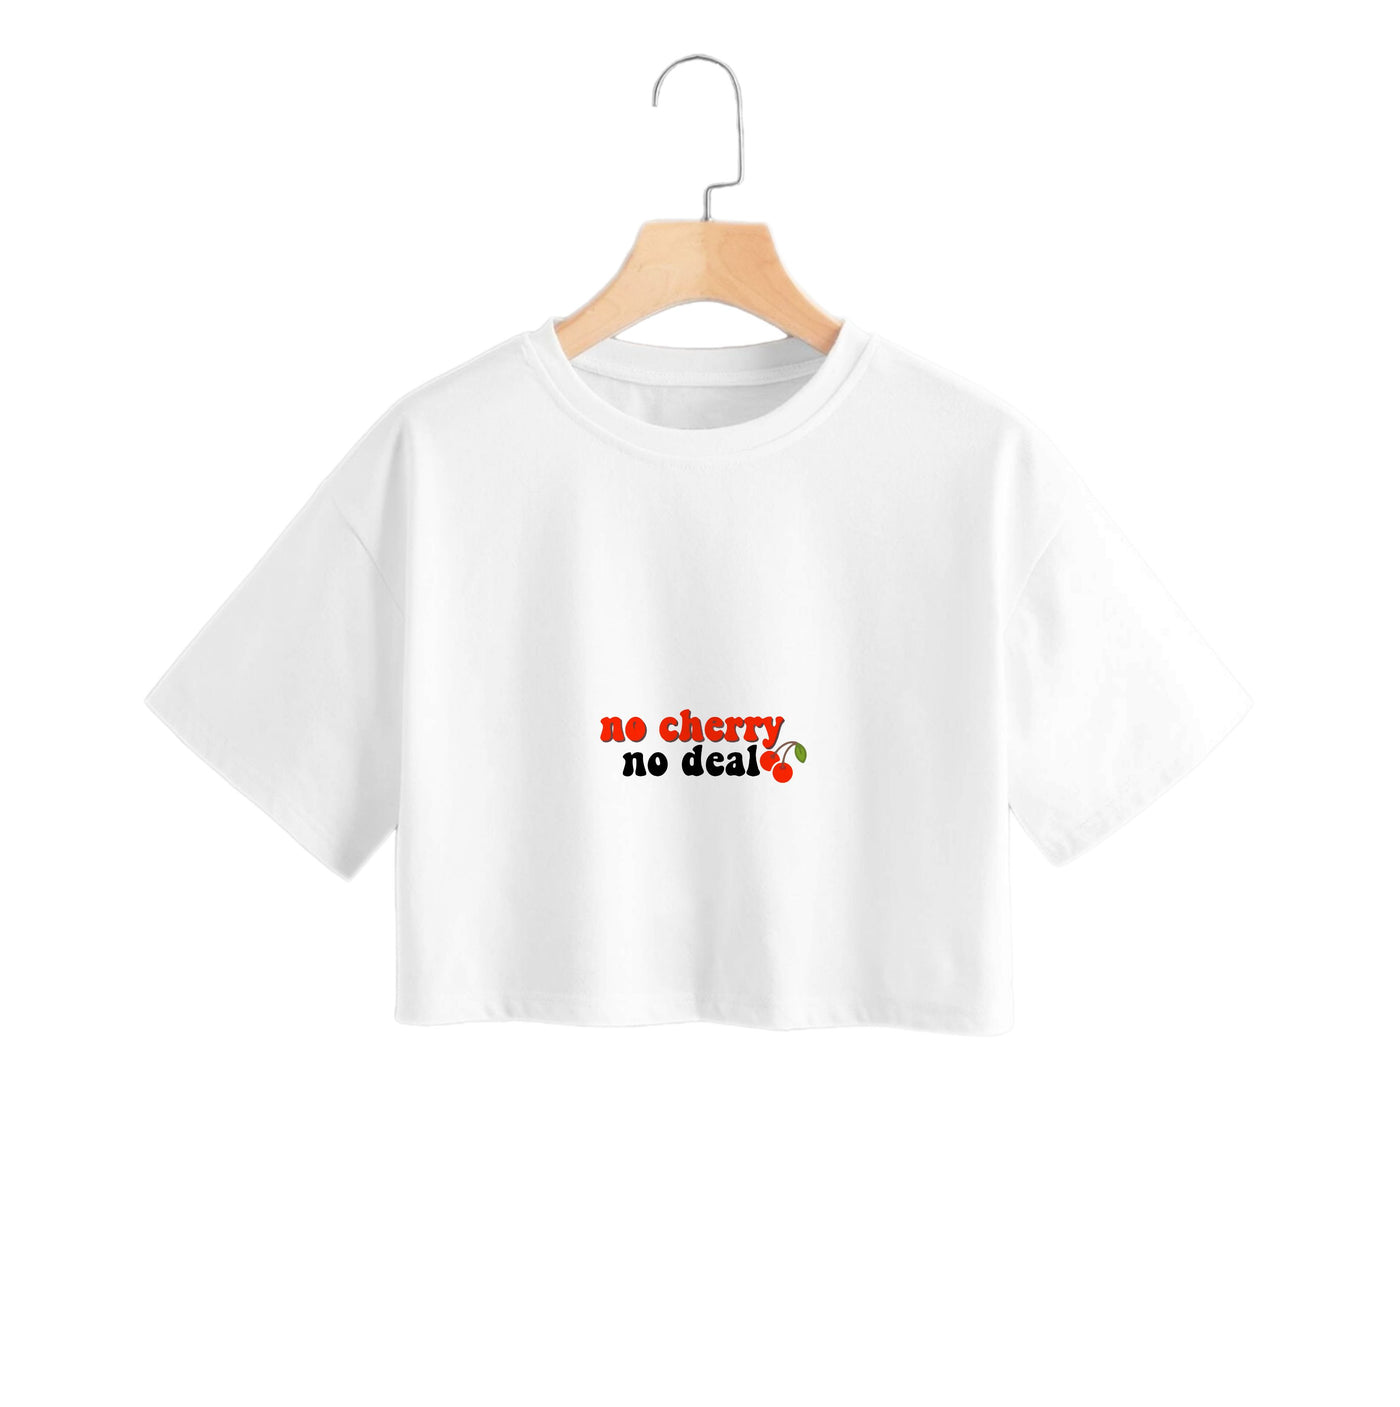 No Cherry No Deal - Stranger Things Crop Top